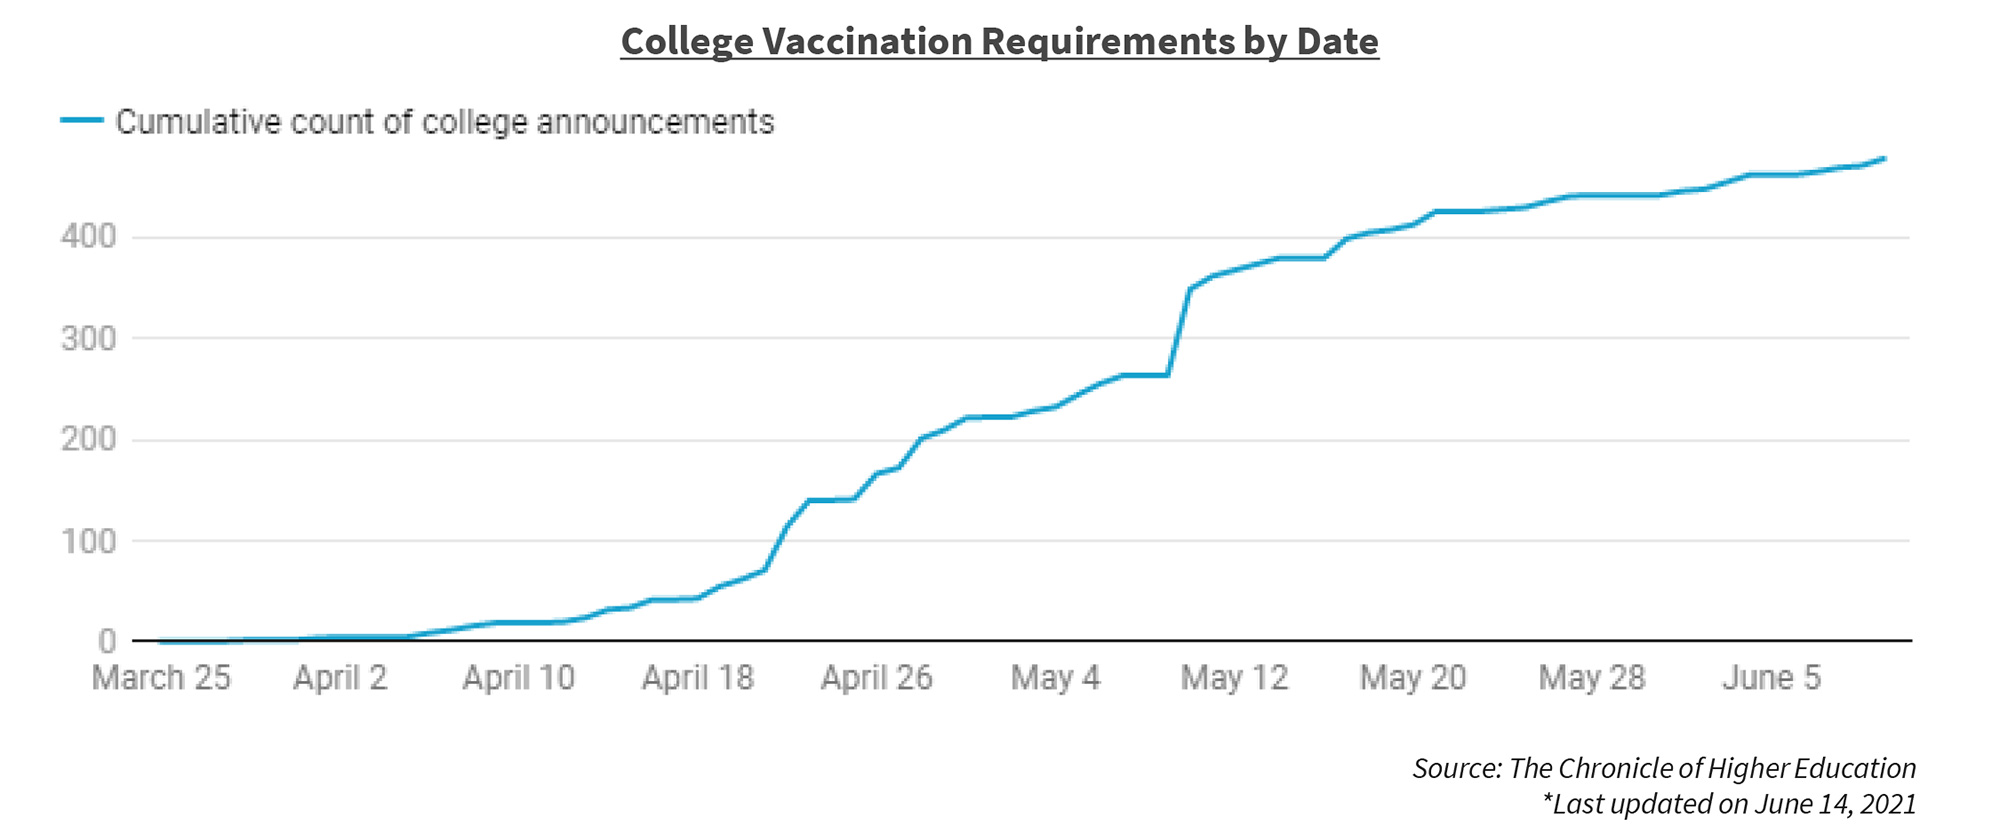 College Vaccination Requirements by Date